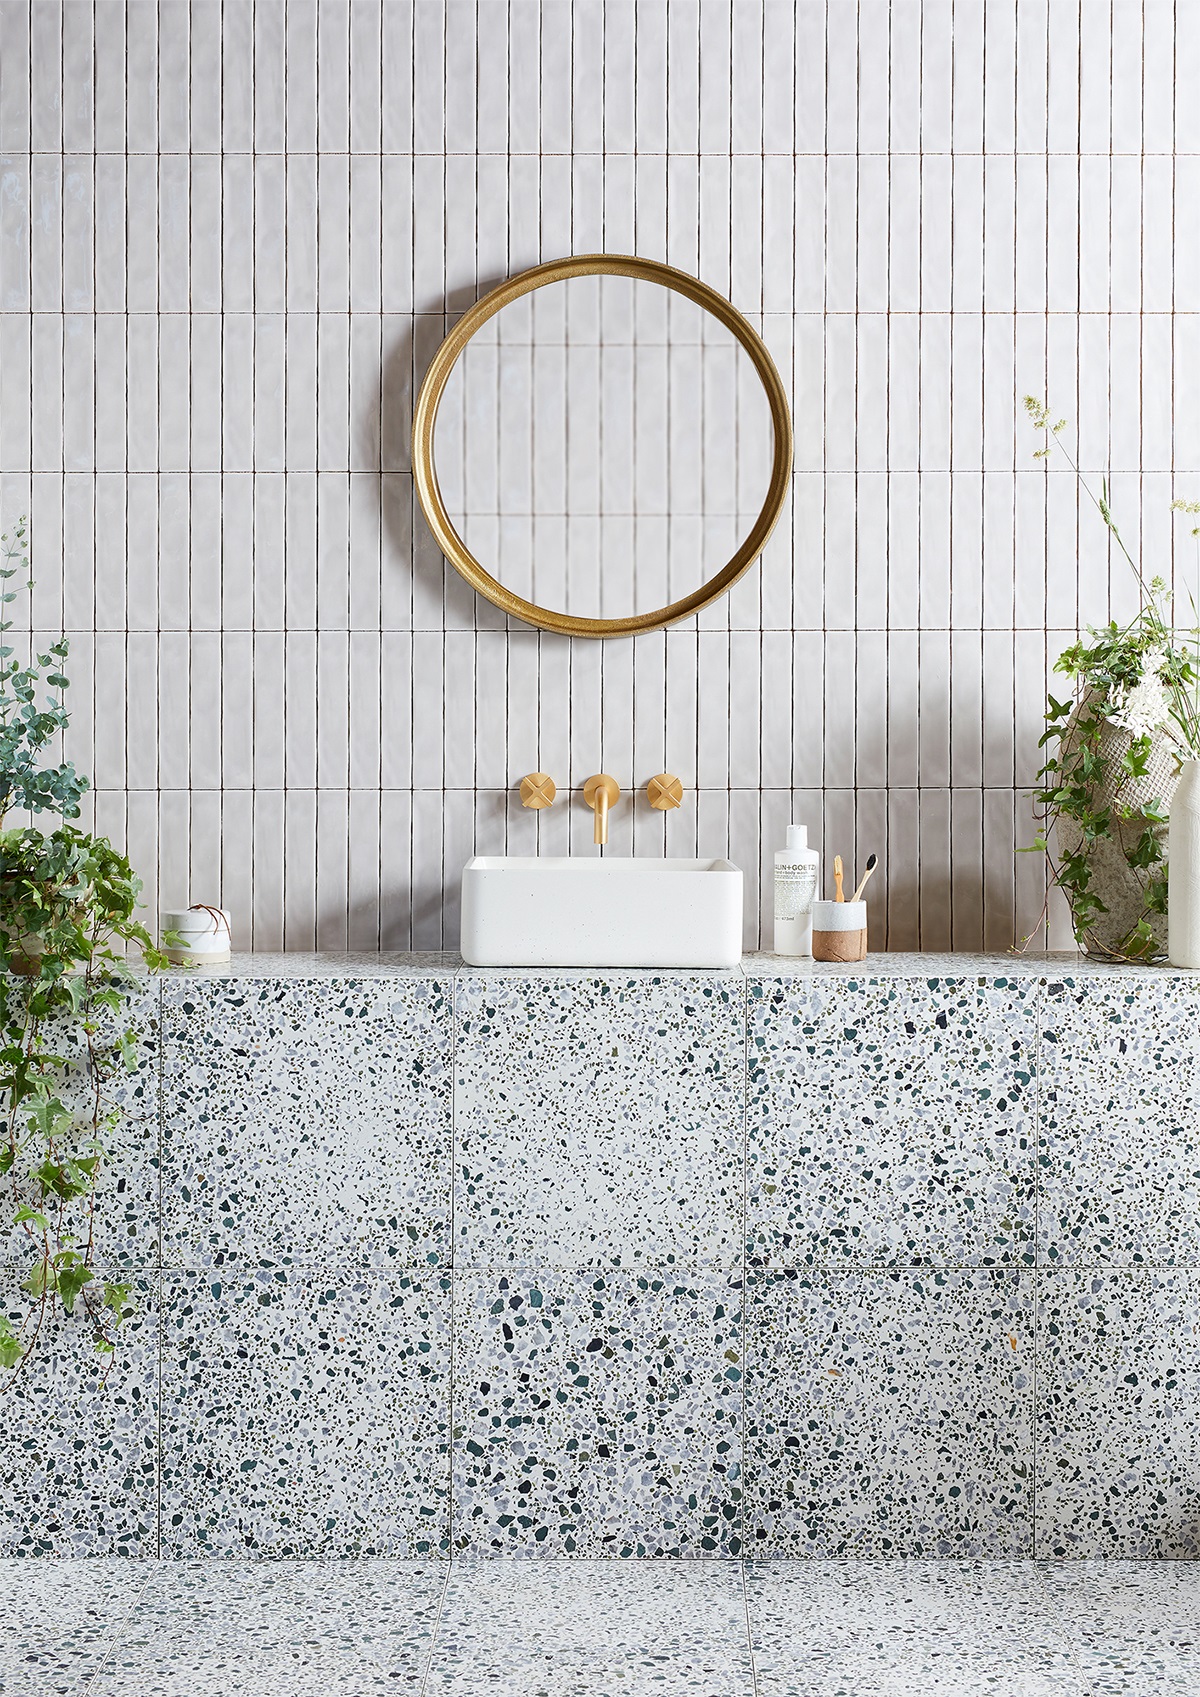 Bert & May fennel terrazzo tiles from Hyperion tiles on the wall in bathroom with round gold framed mirror